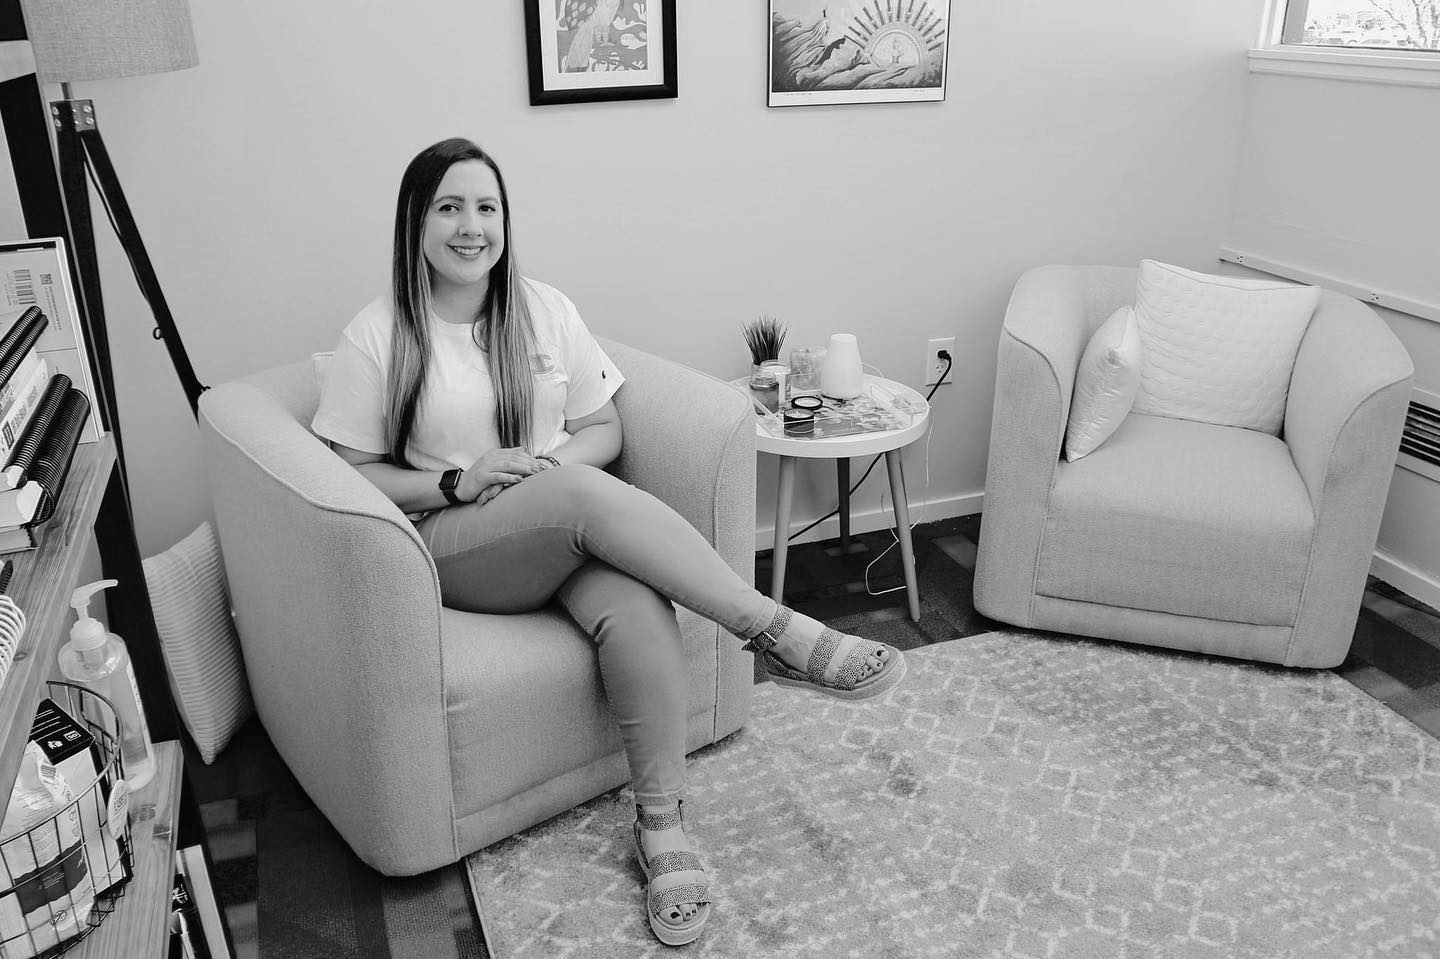 Wide shot of mental health counselor sitting in a comfy room facign the camera.